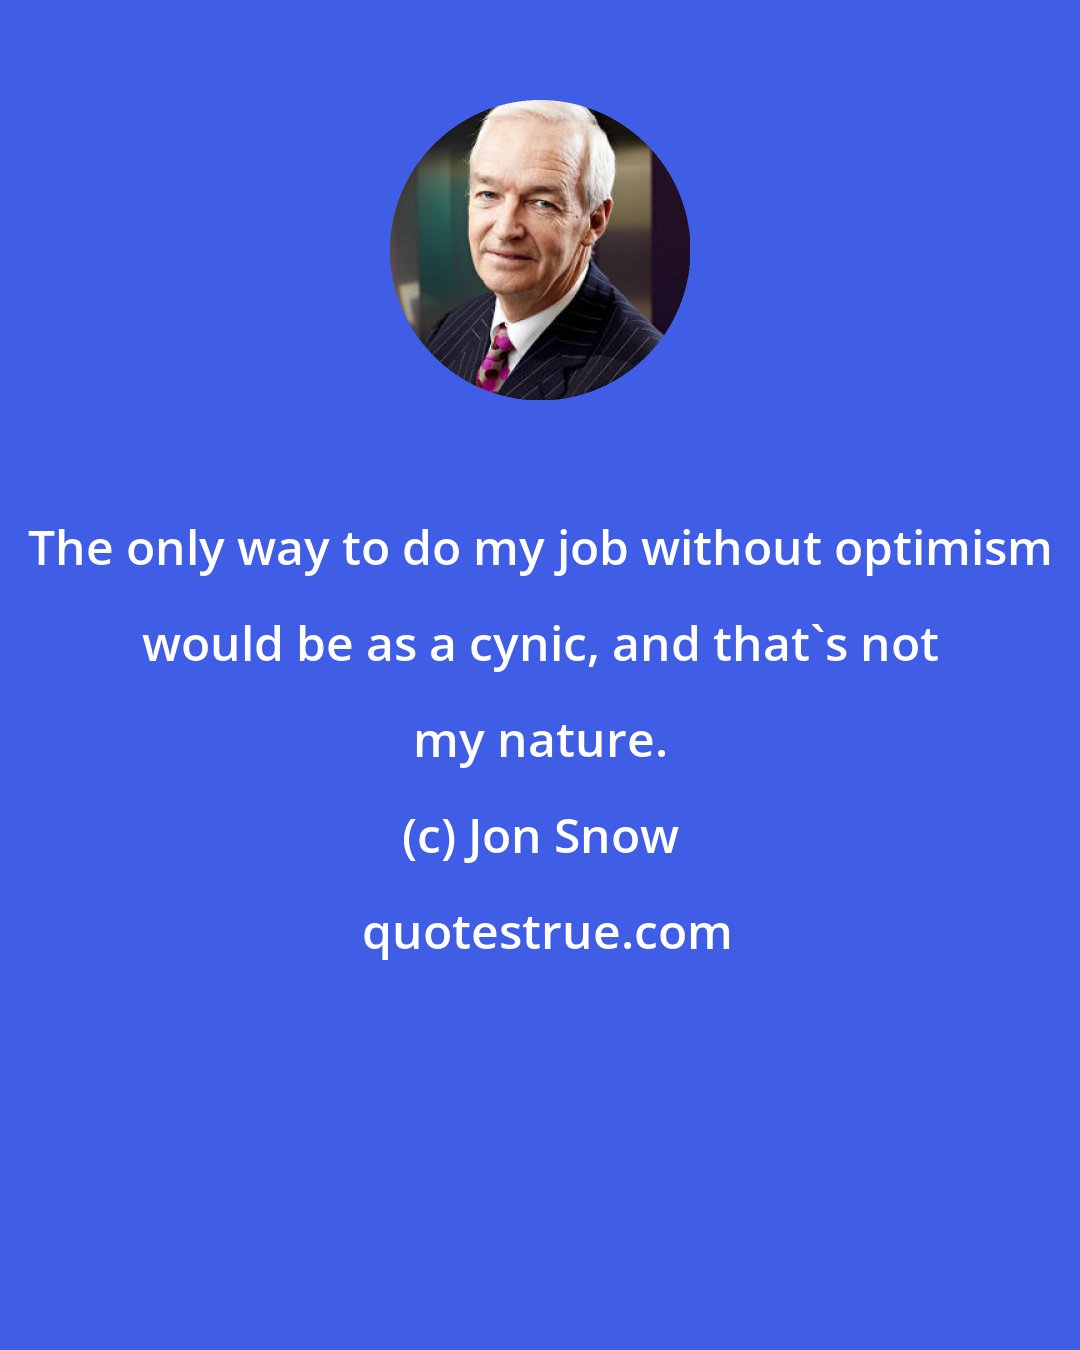 Jon Snow: The only way to do my job without optimism would be as a cynic, and that's not my nature.